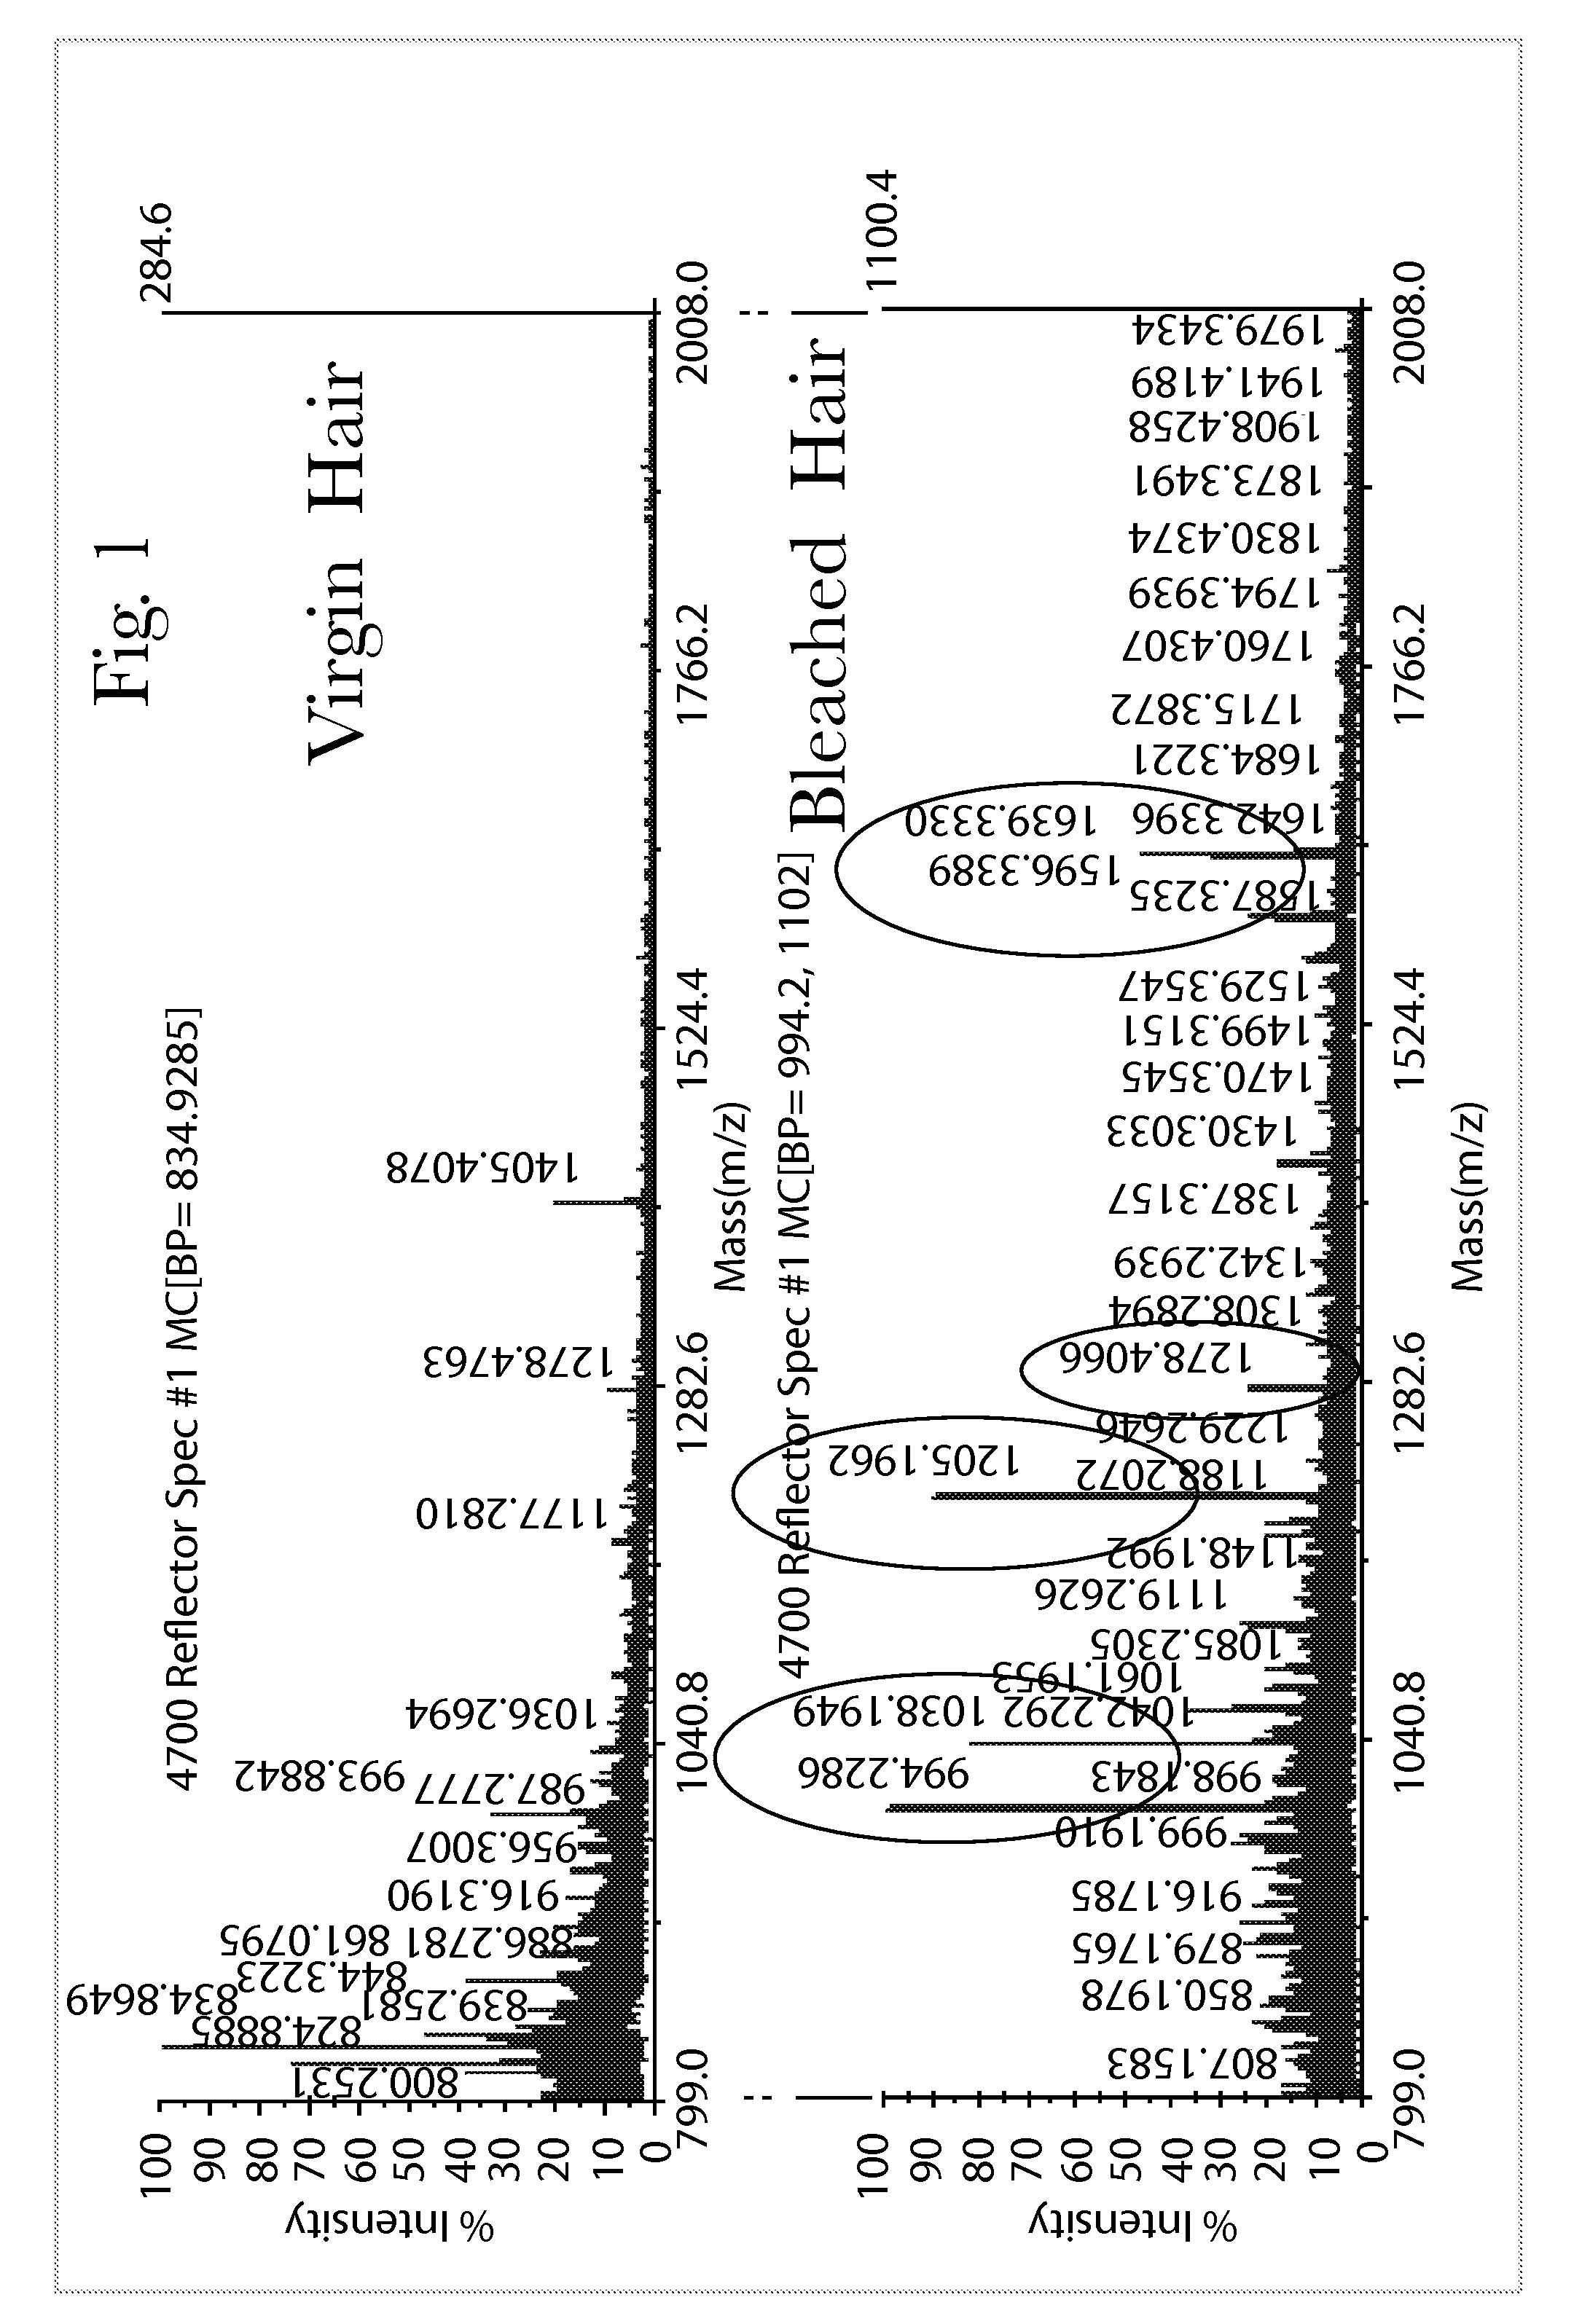 Systems and methods of detecting and demonstrating hair damage via evaluation of protein fragments